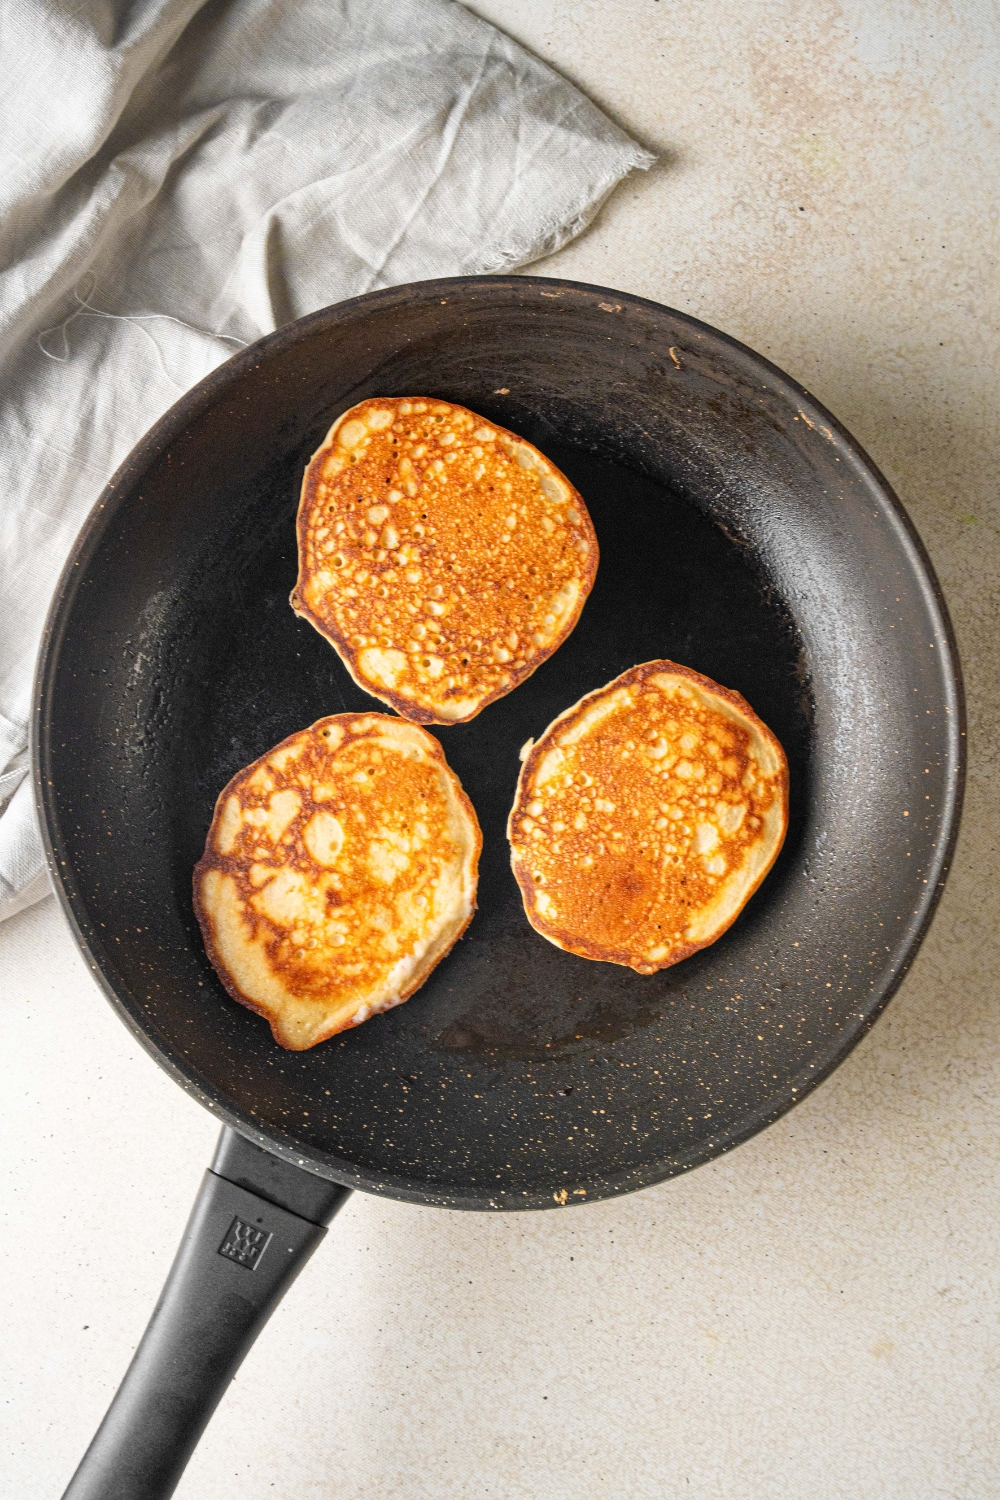 A frying pan with the pancakes cooking.